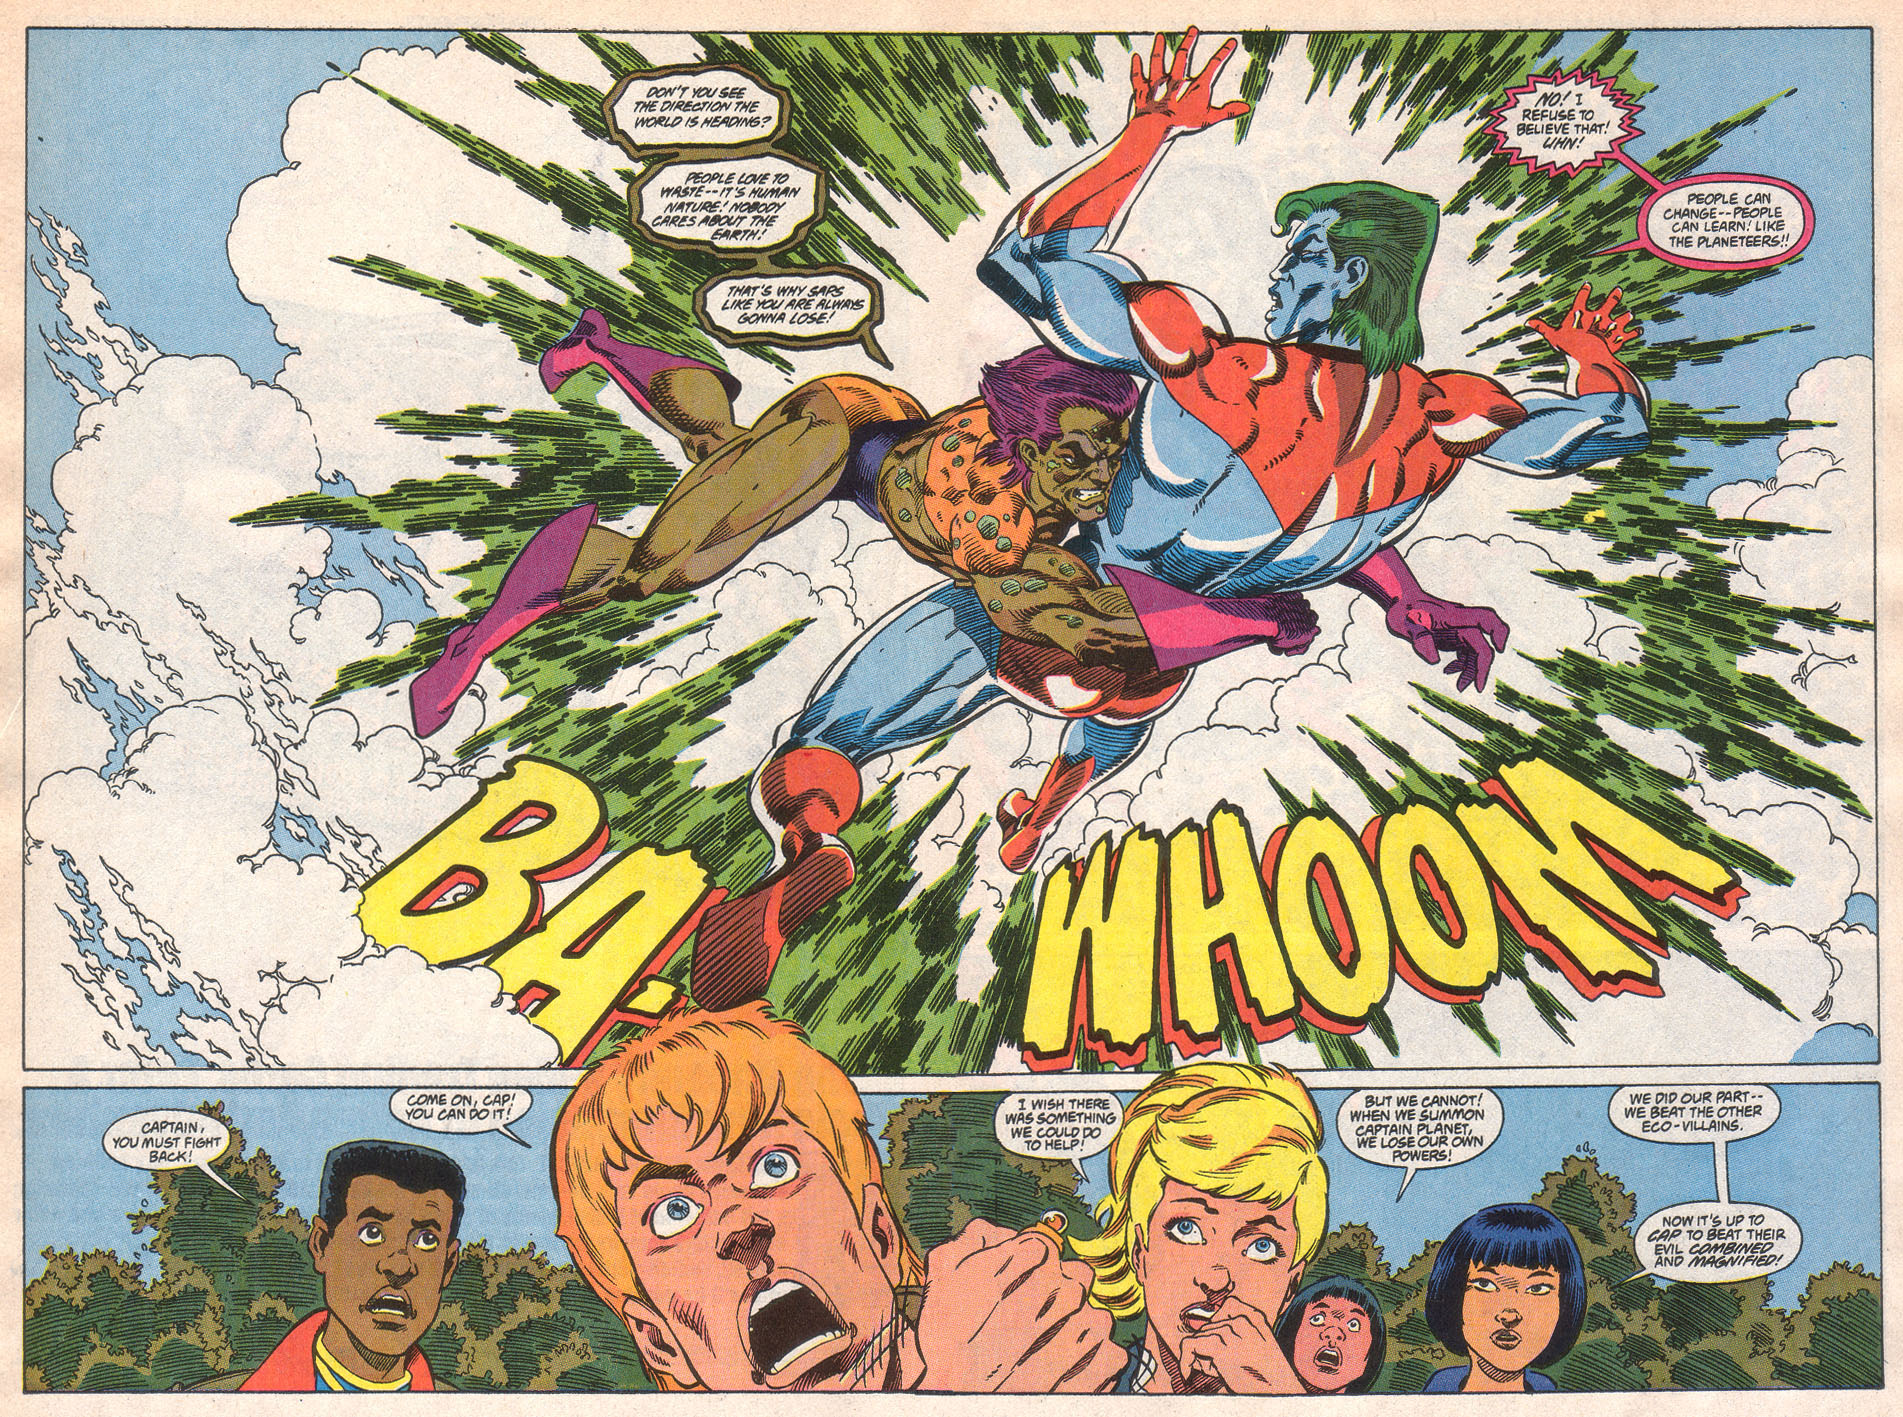 Captain Planet And The Planeteers Issue 8 | Read Captain Planet And The  Planeteers Issue 8 comic online in high quality. Read Full Comic online for  free - Read comics online in high quality .